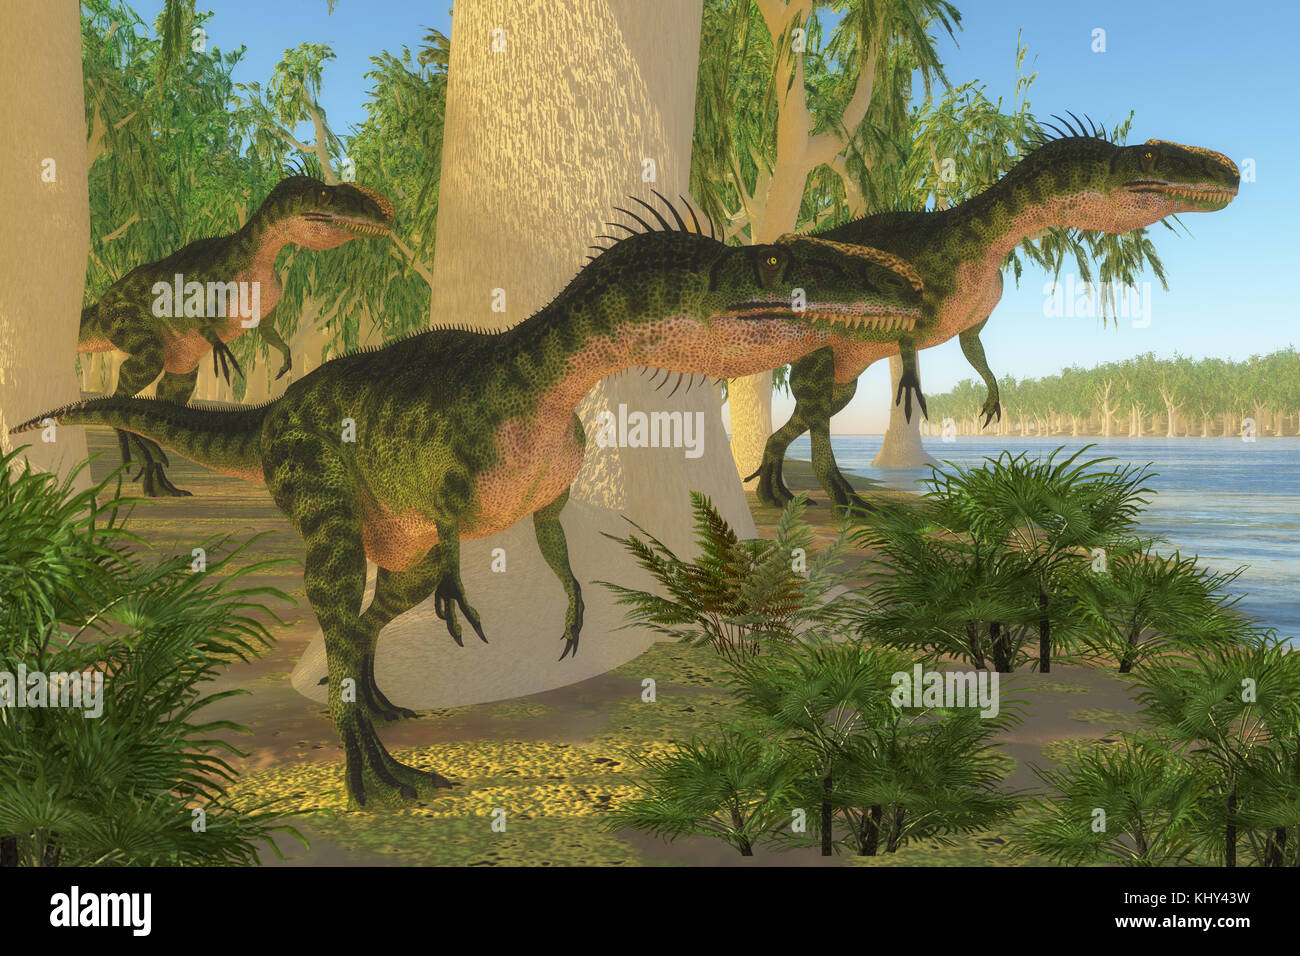 Monolophosaurus Dinosaurs - A group of Monolophosaurus dinosaurs come to a shore to drink and watch for prey in the Jurassic Period. Stock Photo